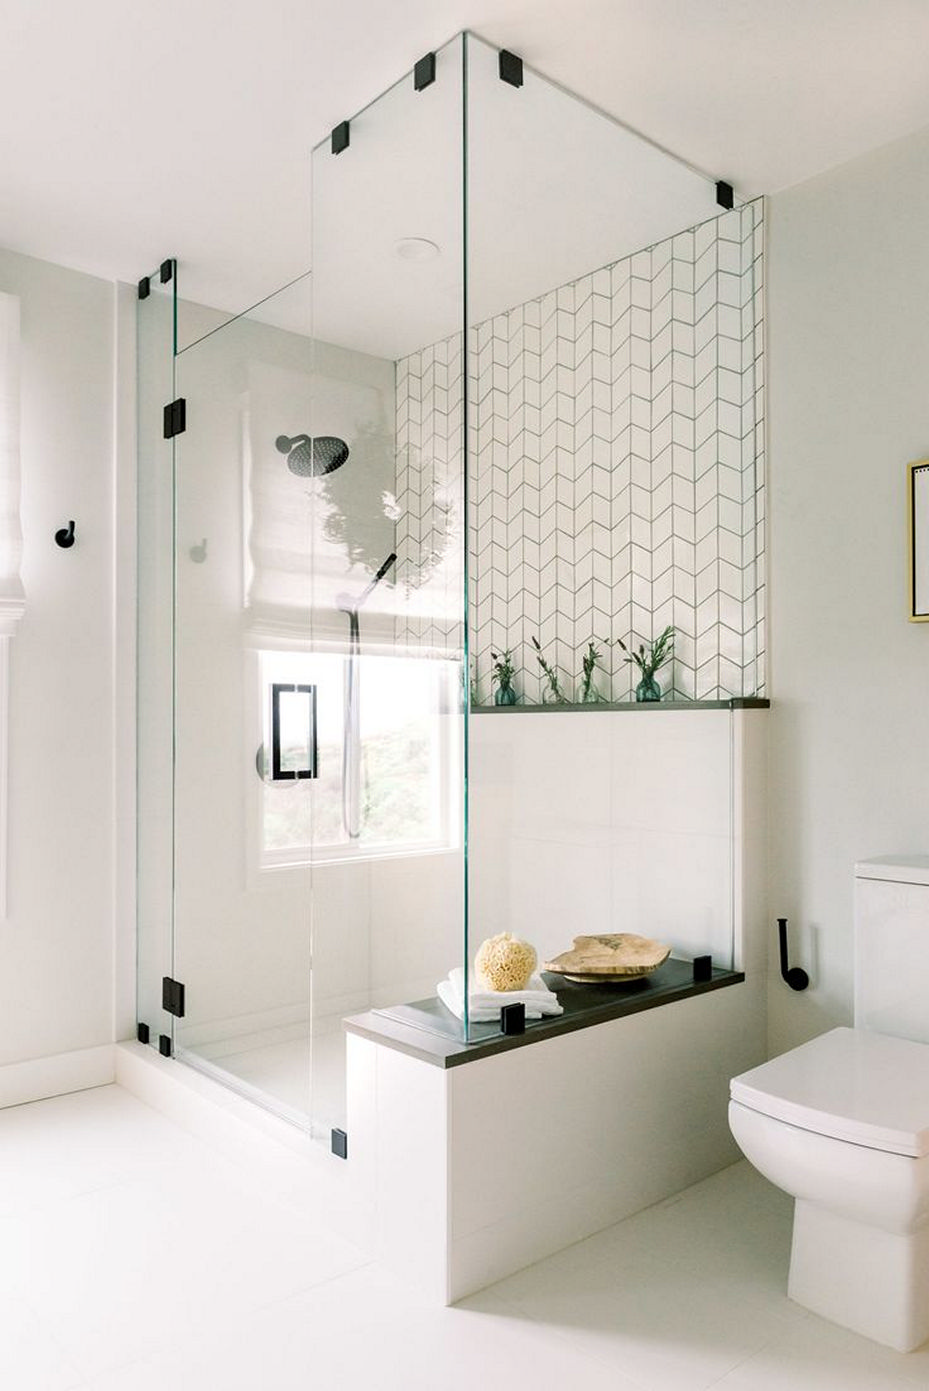 Things to include in the bathroom remodeling idea 2